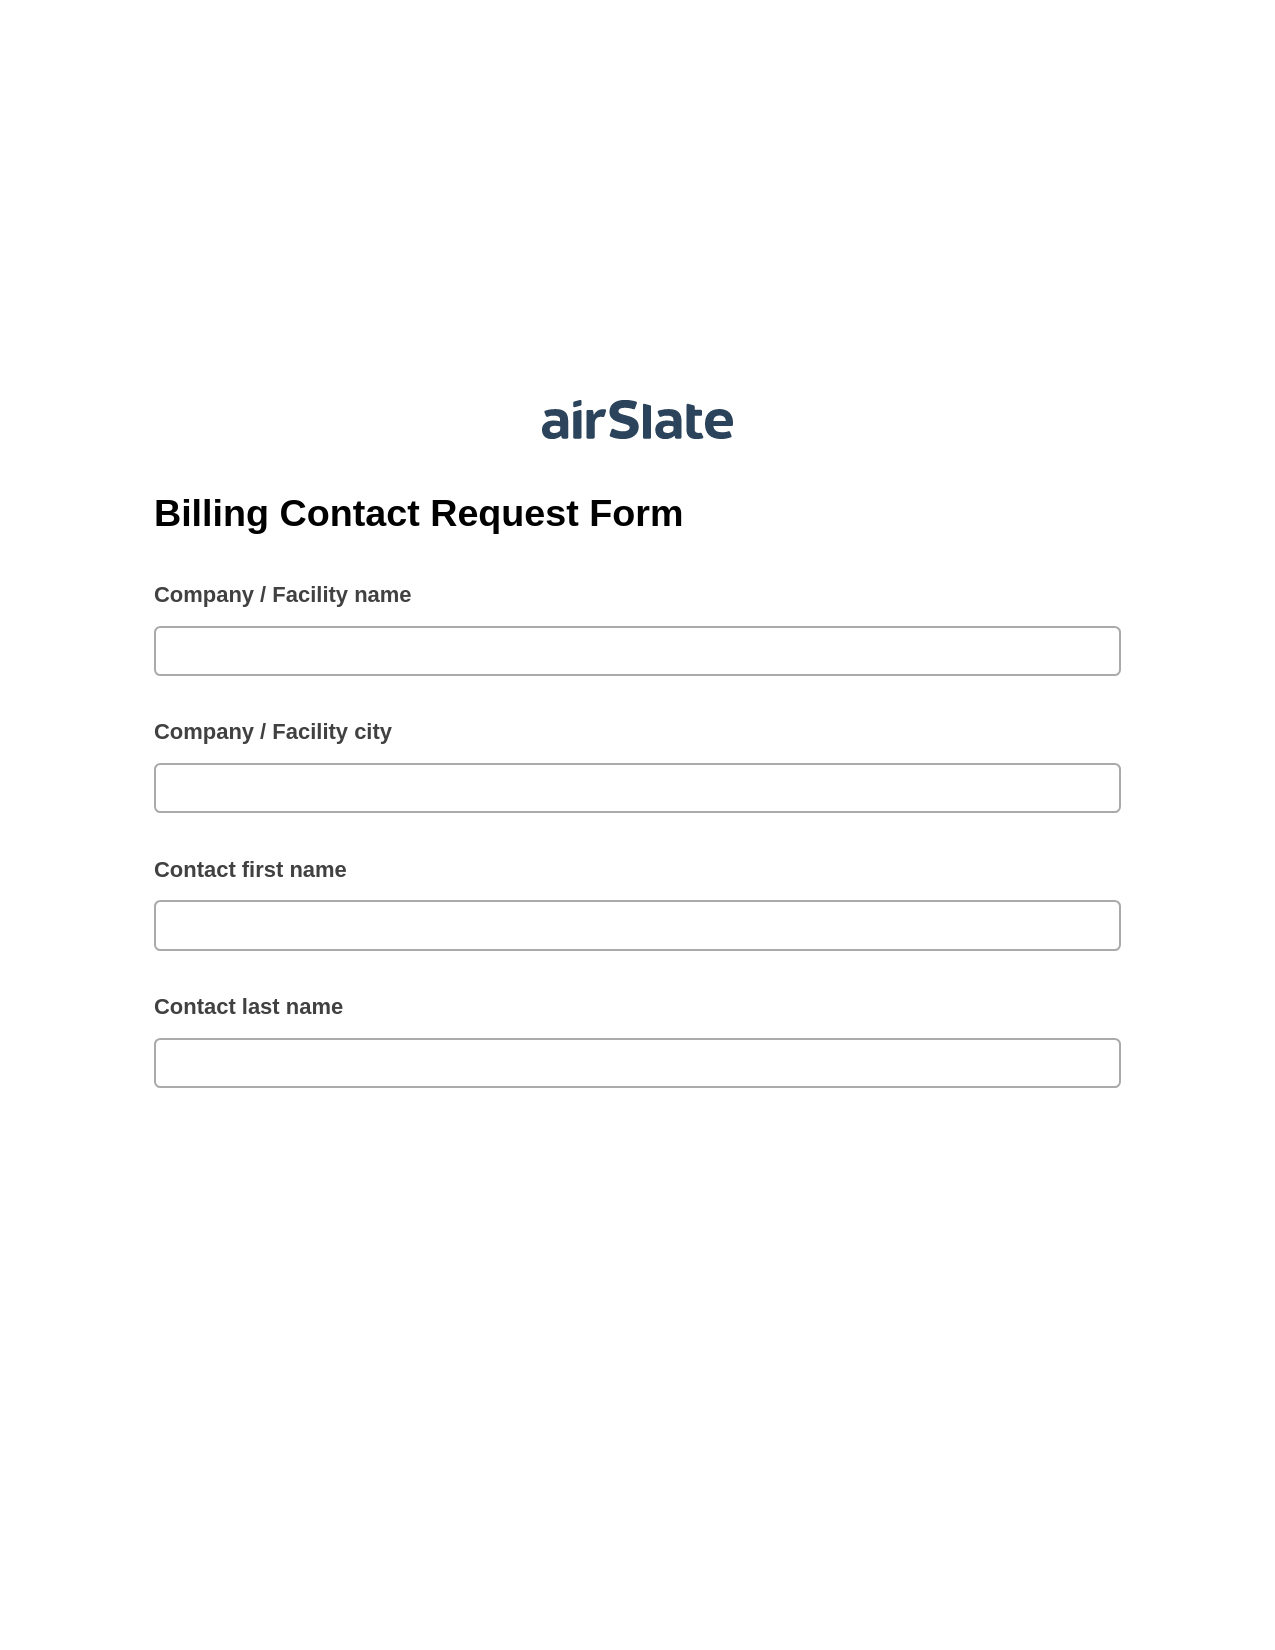 Billing Contact Request Form Pre-fill Dropdowns from CSV File Bot, Webhook Bot, Webhook Postfinish Bot